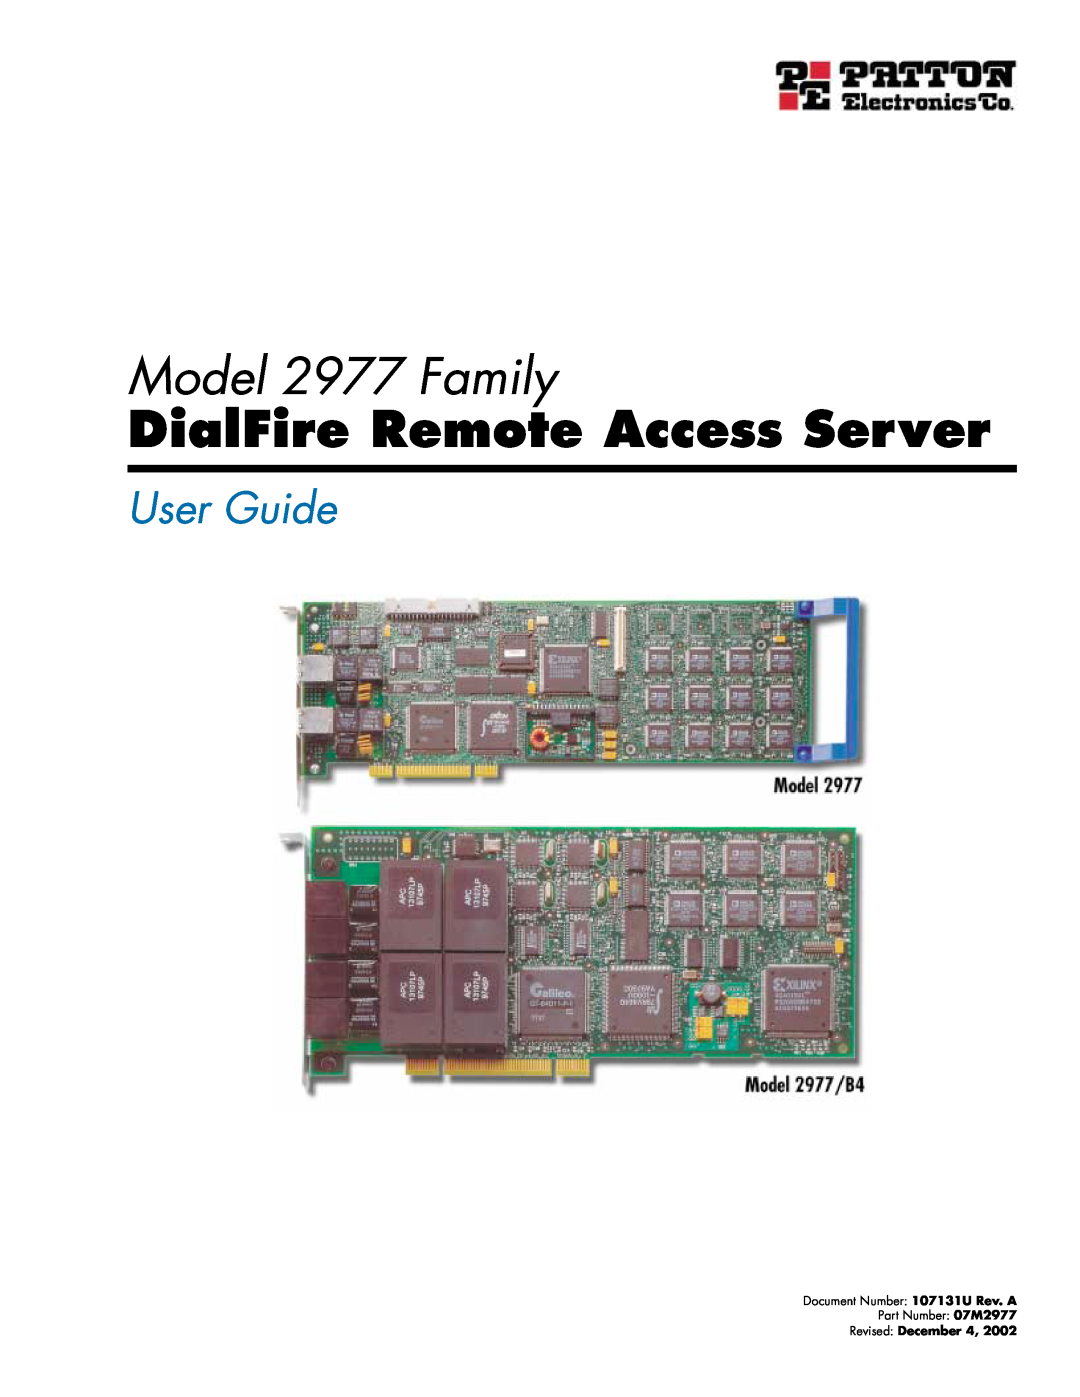 Patton electronic manual Model 2977 Family, DialFire Remote Access Server, User Guide, Revised December 4 